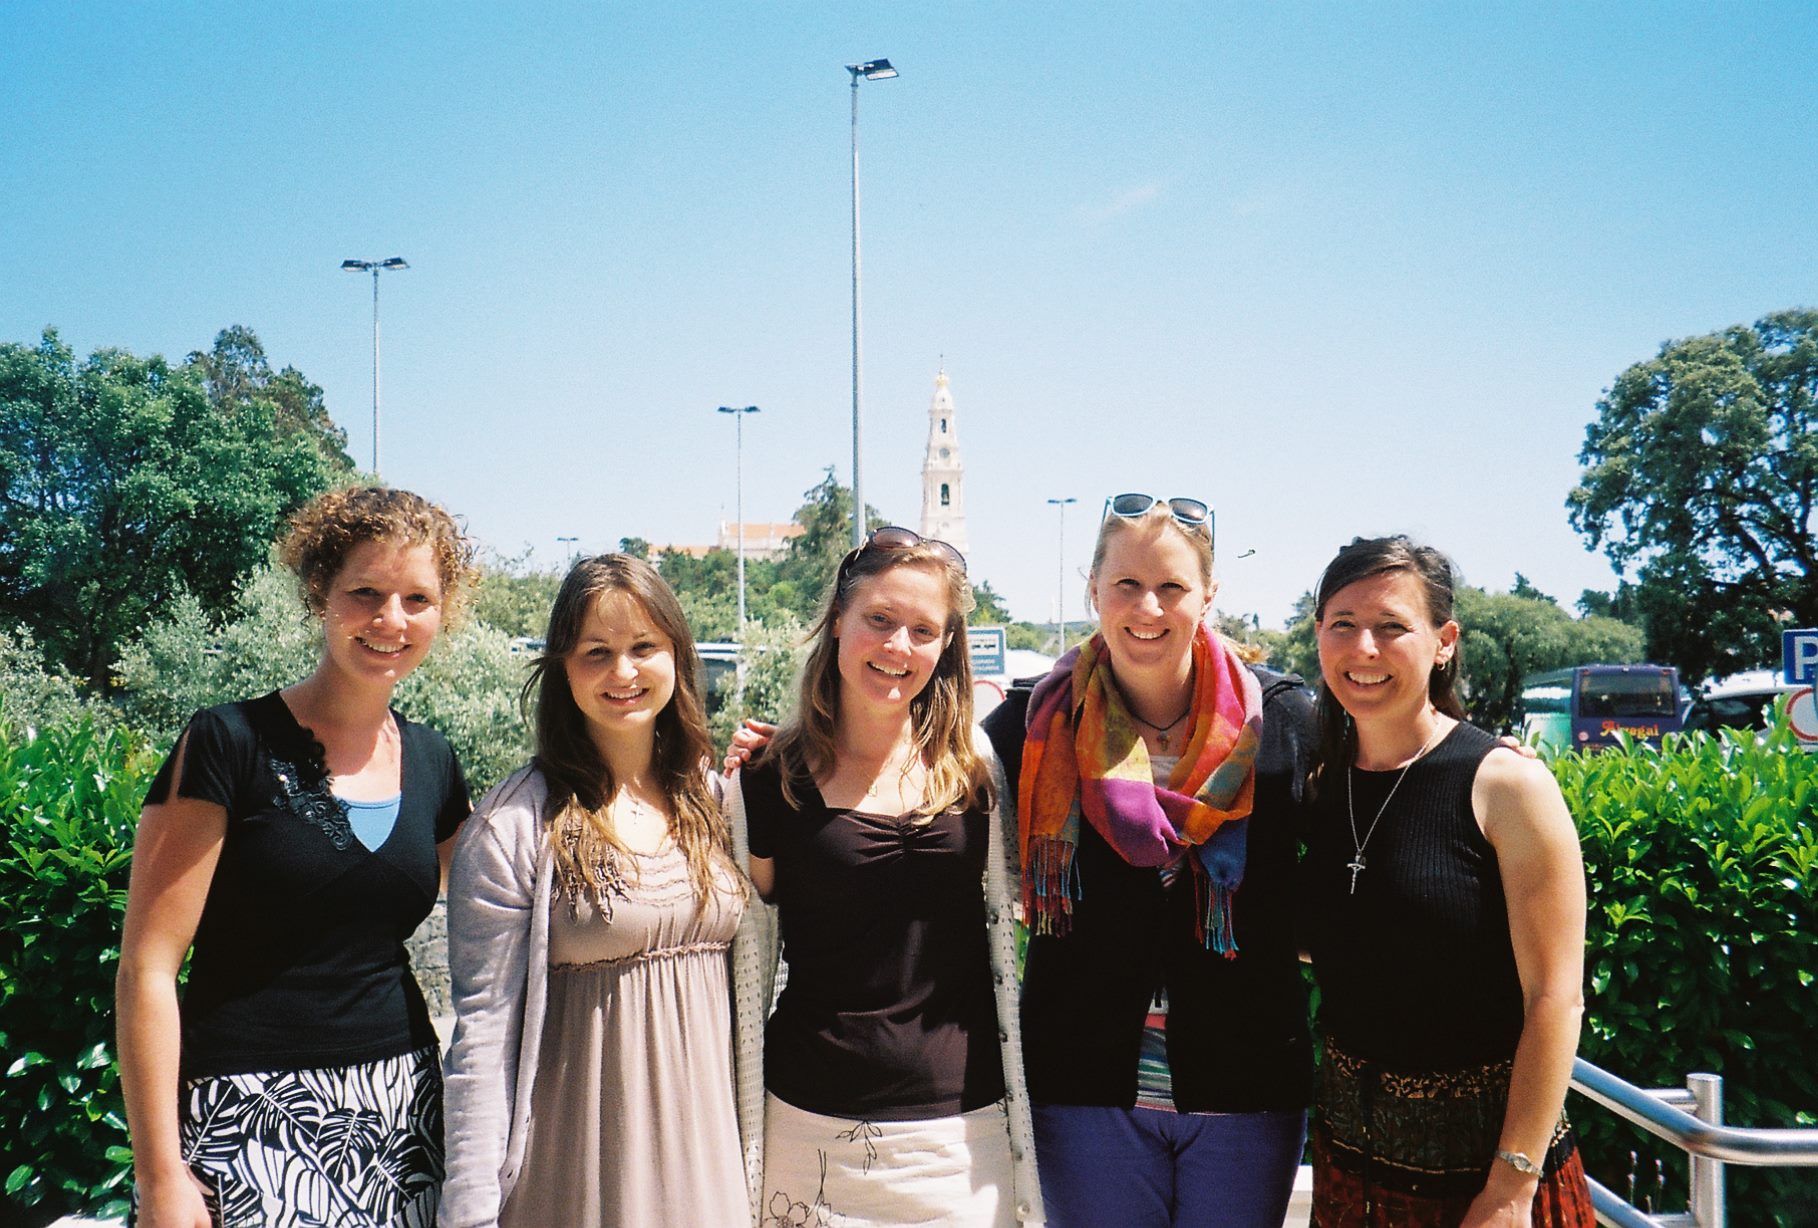 ITI students with a couple of new friends at the Theology of the Body International Symposium in Fatima, Portugal (June 13-16, 2013).